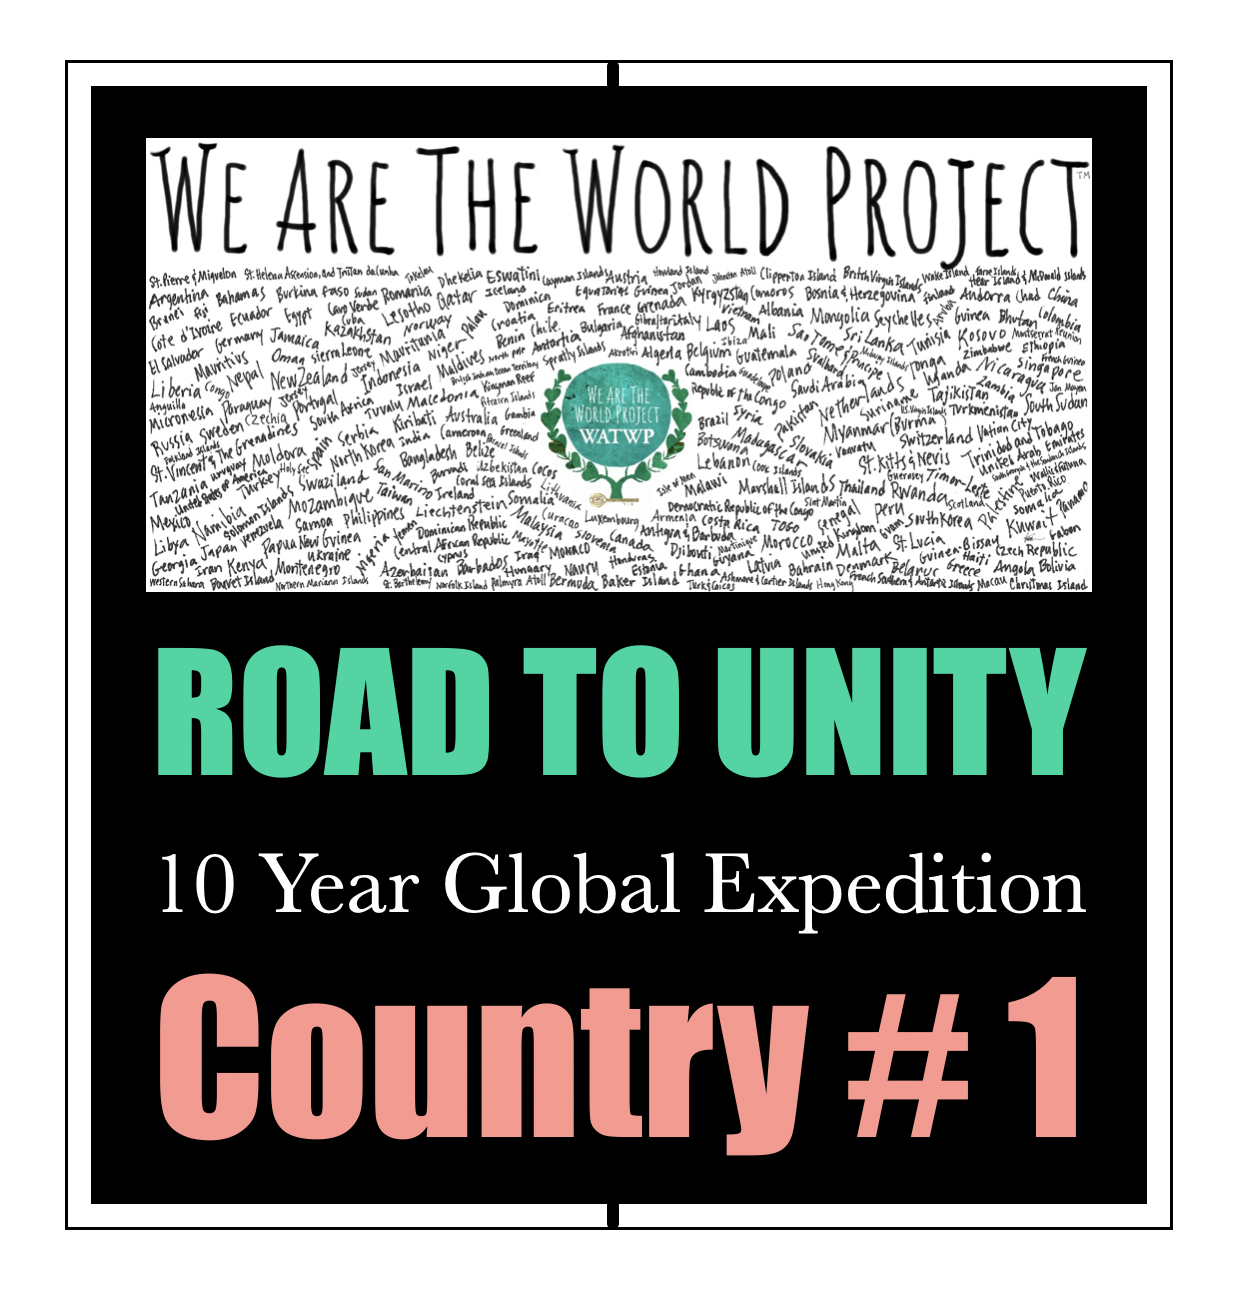 ROAD TO UNITY - COUNTRY 1 - by giselle trujillo for wearetheworldprojectScreen Shot 2022-01-12 at 9.07.38 PM